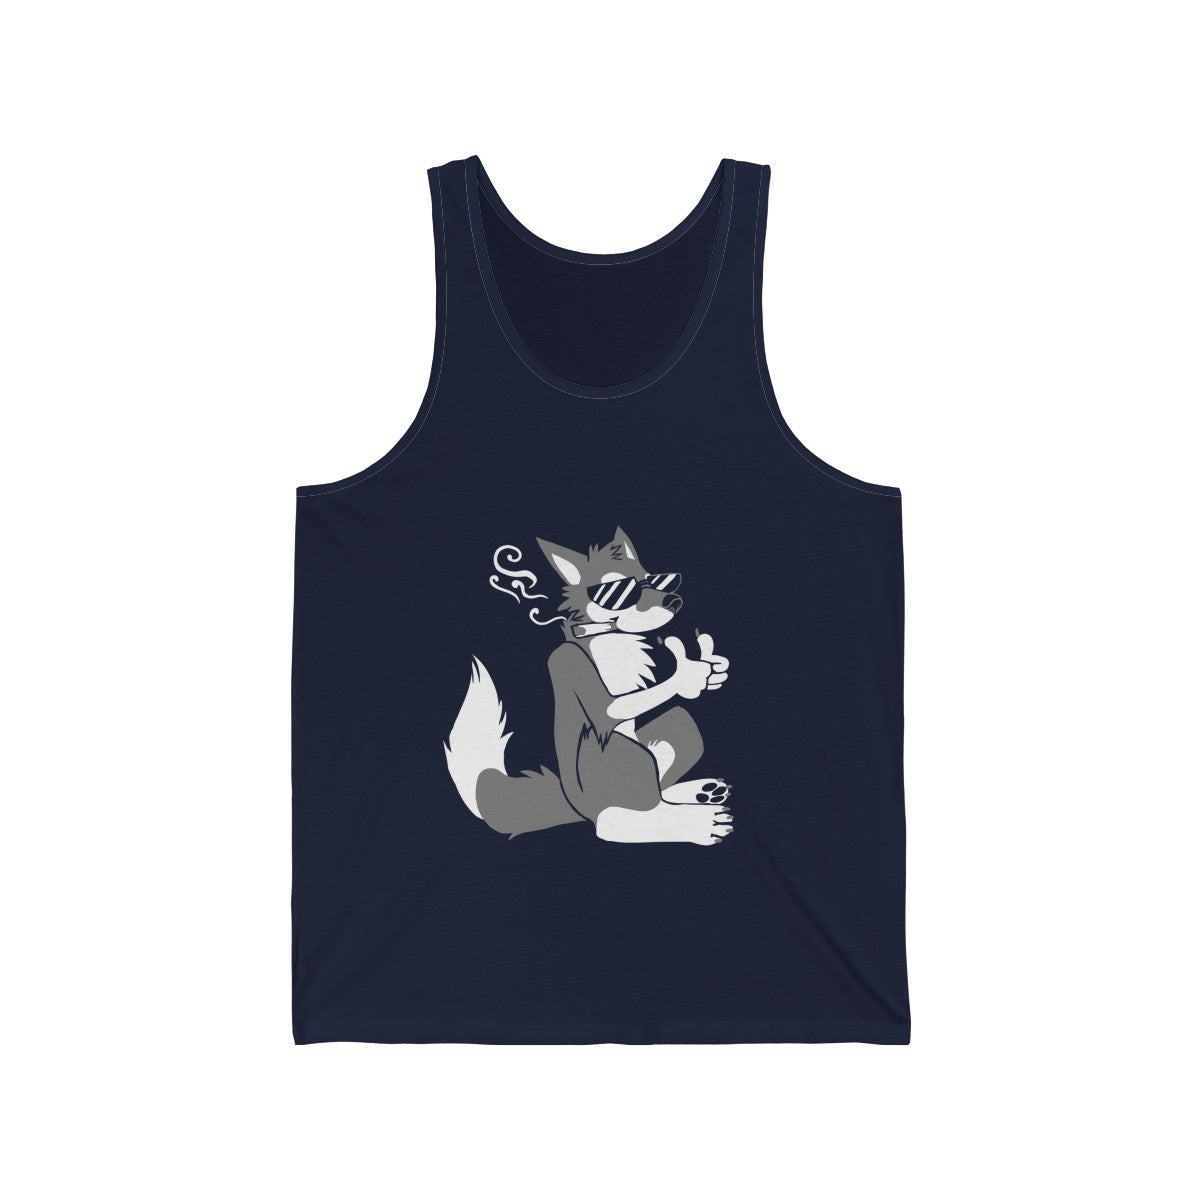 Chill Out - Tank Top Tank Top Dire Creatures Navy Blue XS 